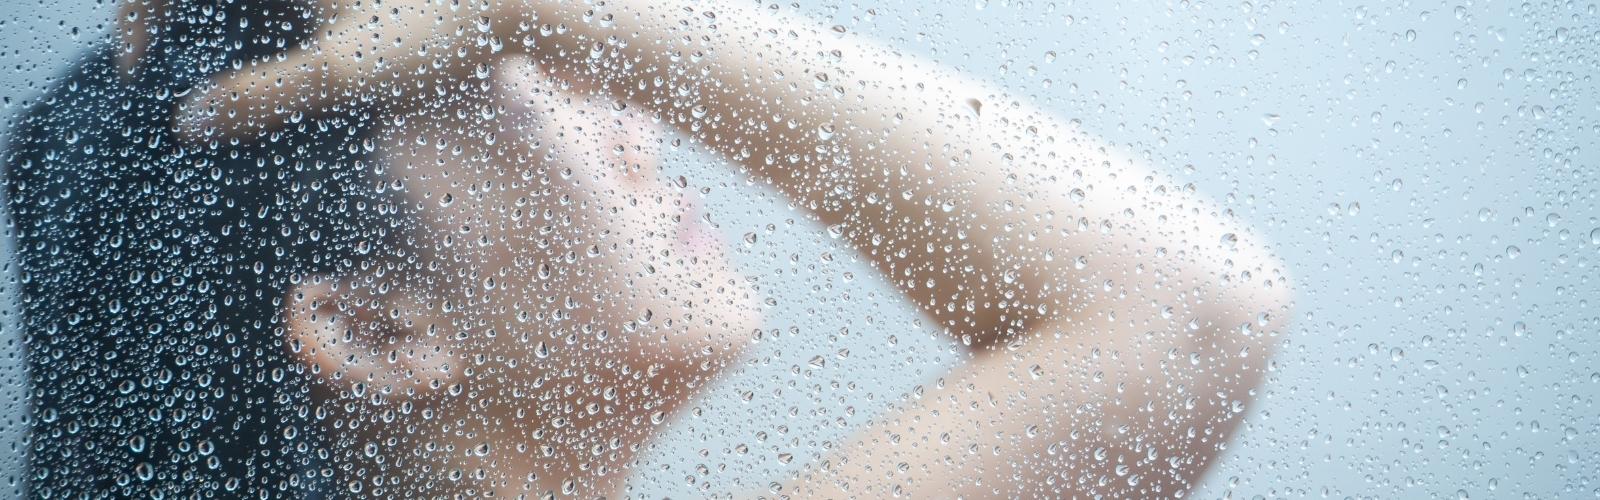 Benefits of Utilizing a Drain Filter for Your Shower